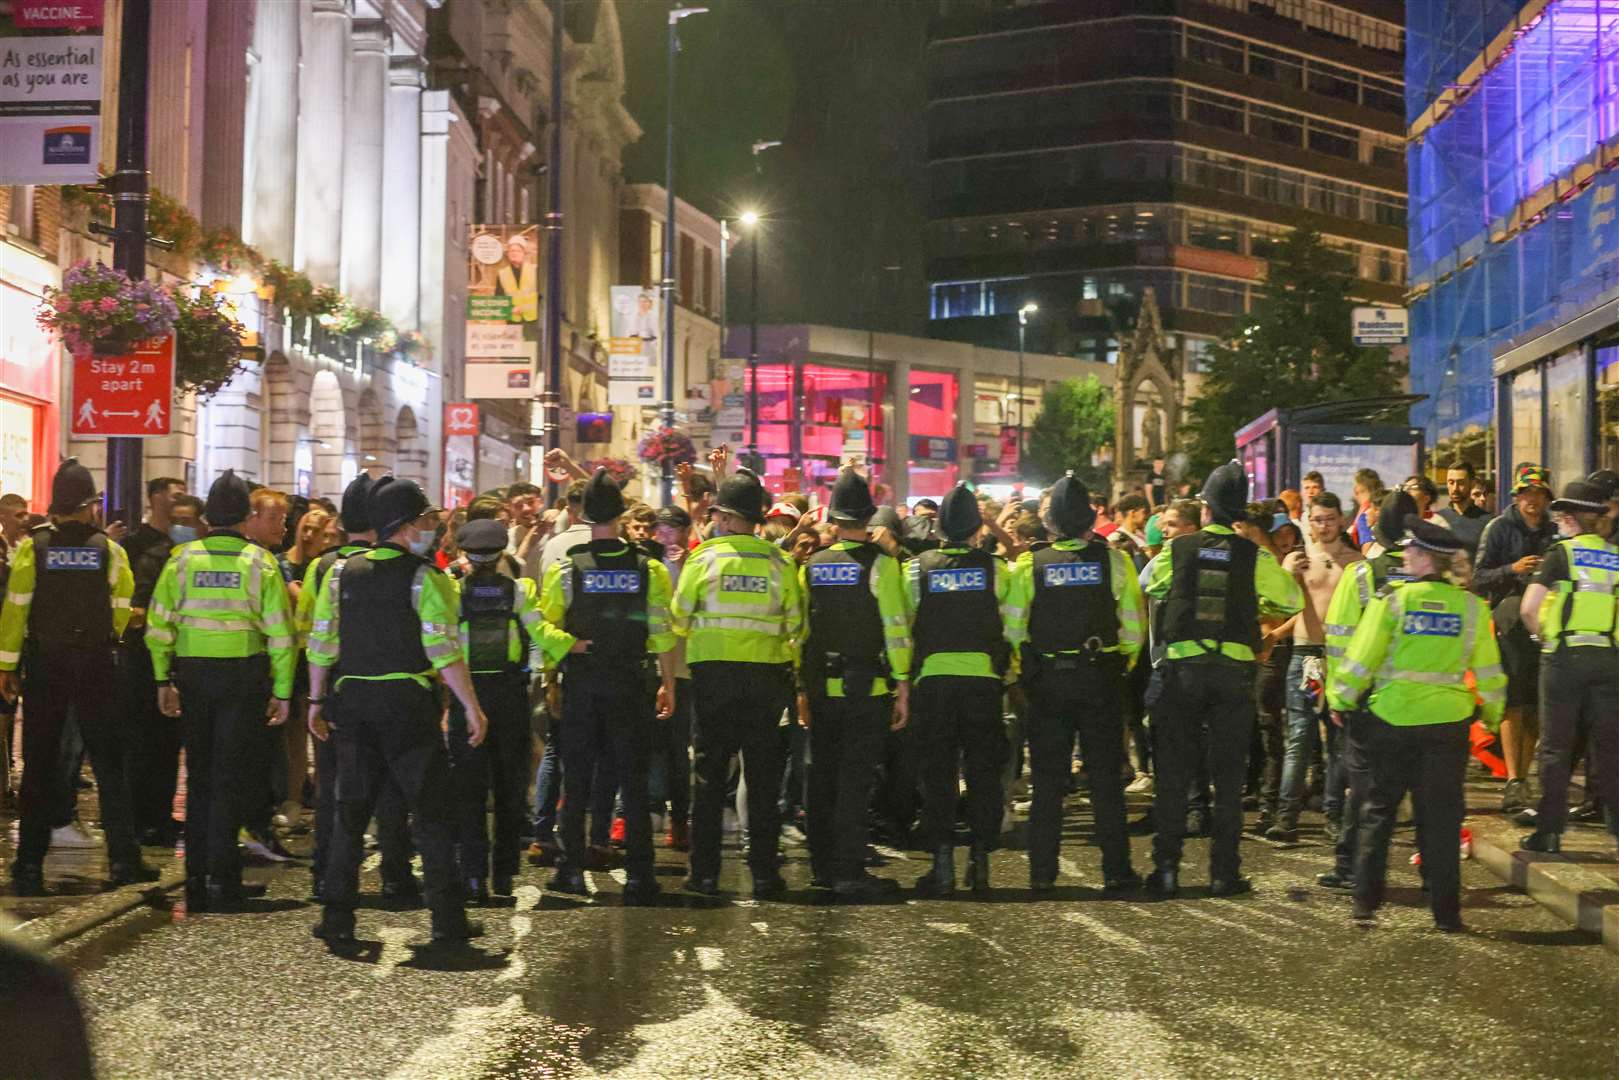 Officers confront crowds after England lost to Italy in the Euro 2020 final Picture: UKNIP